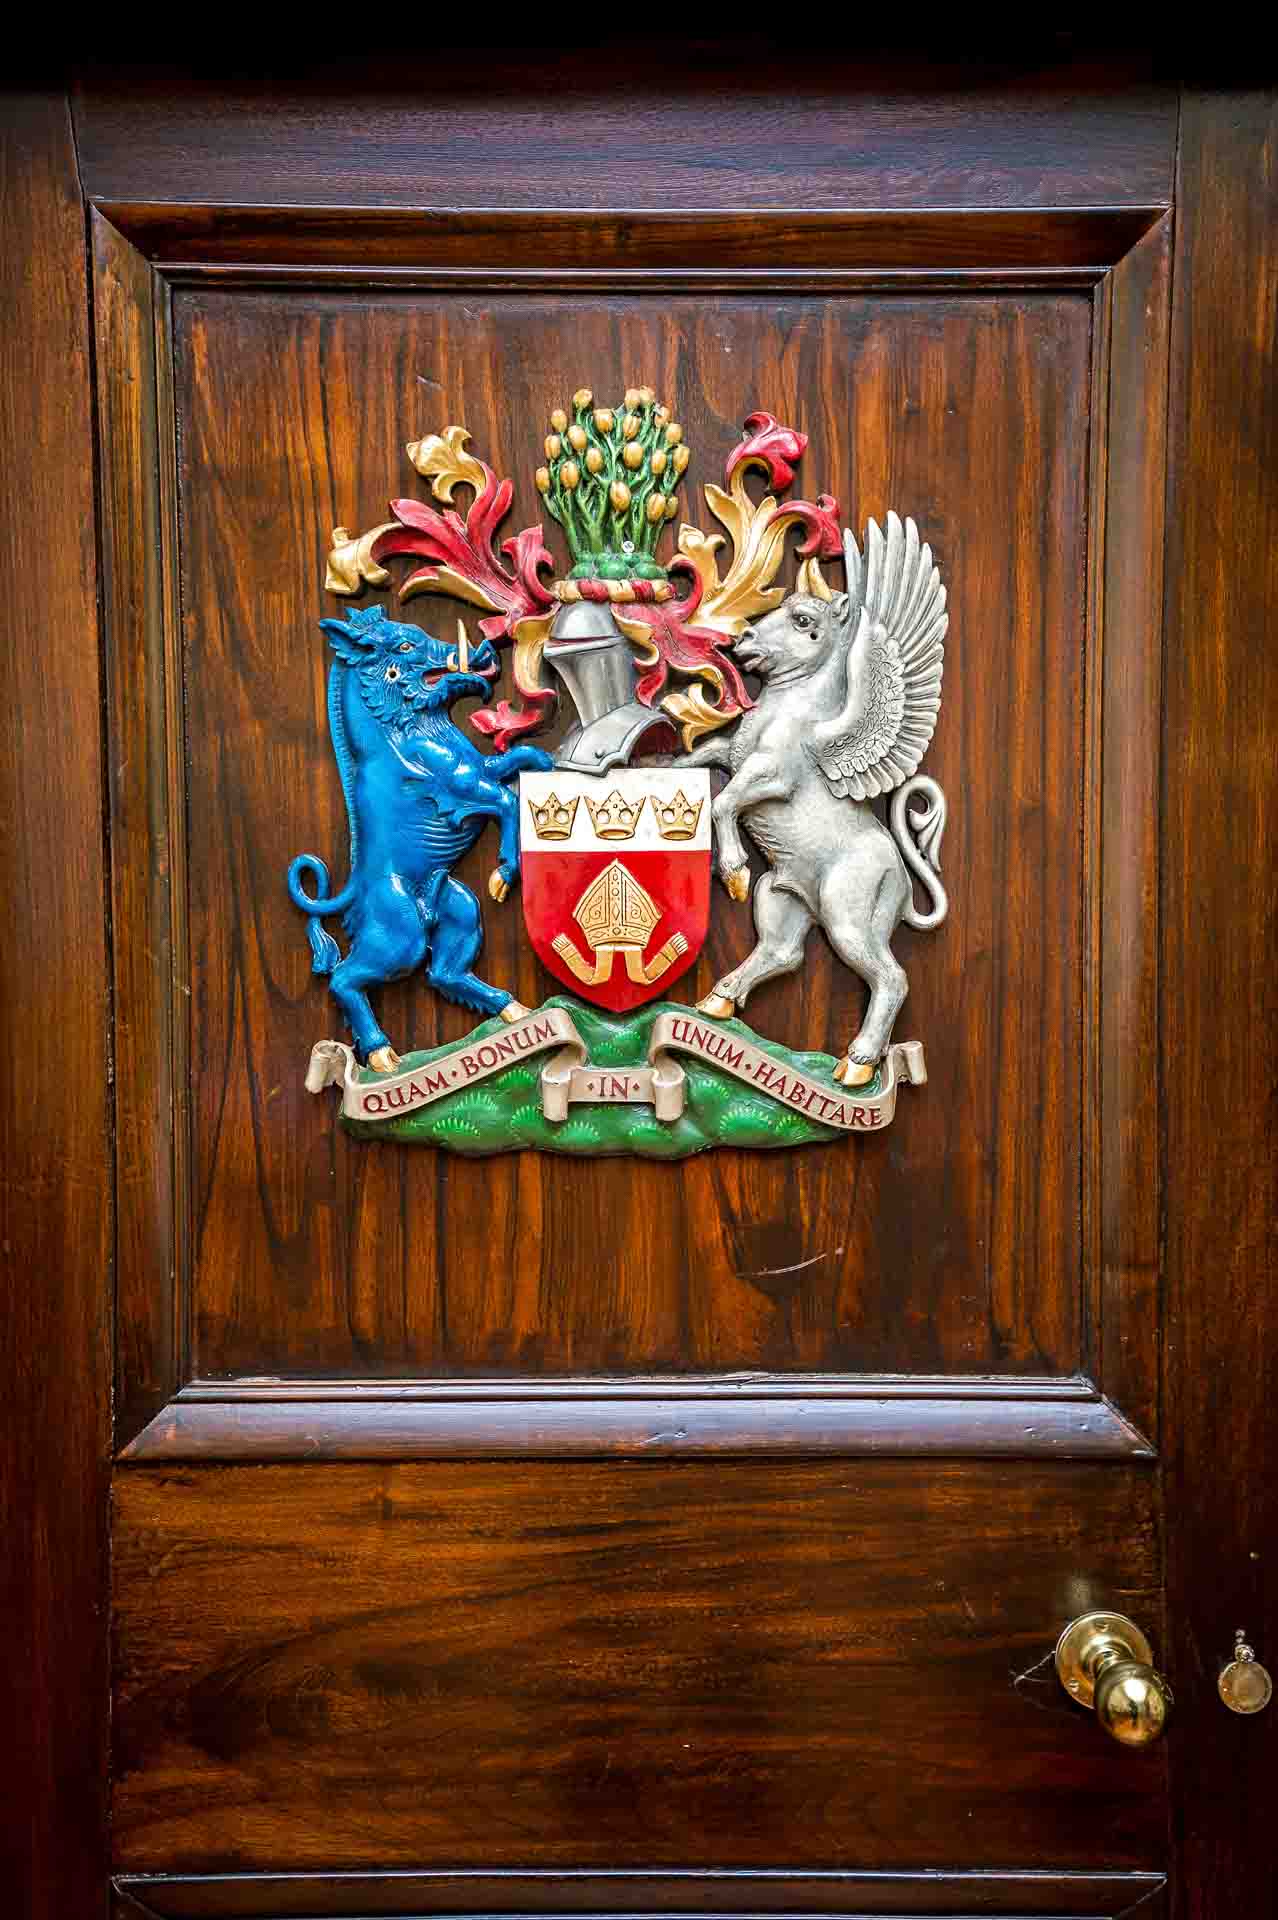 Royal Borough of Kensington and Chelsea Coat of Arms on Door